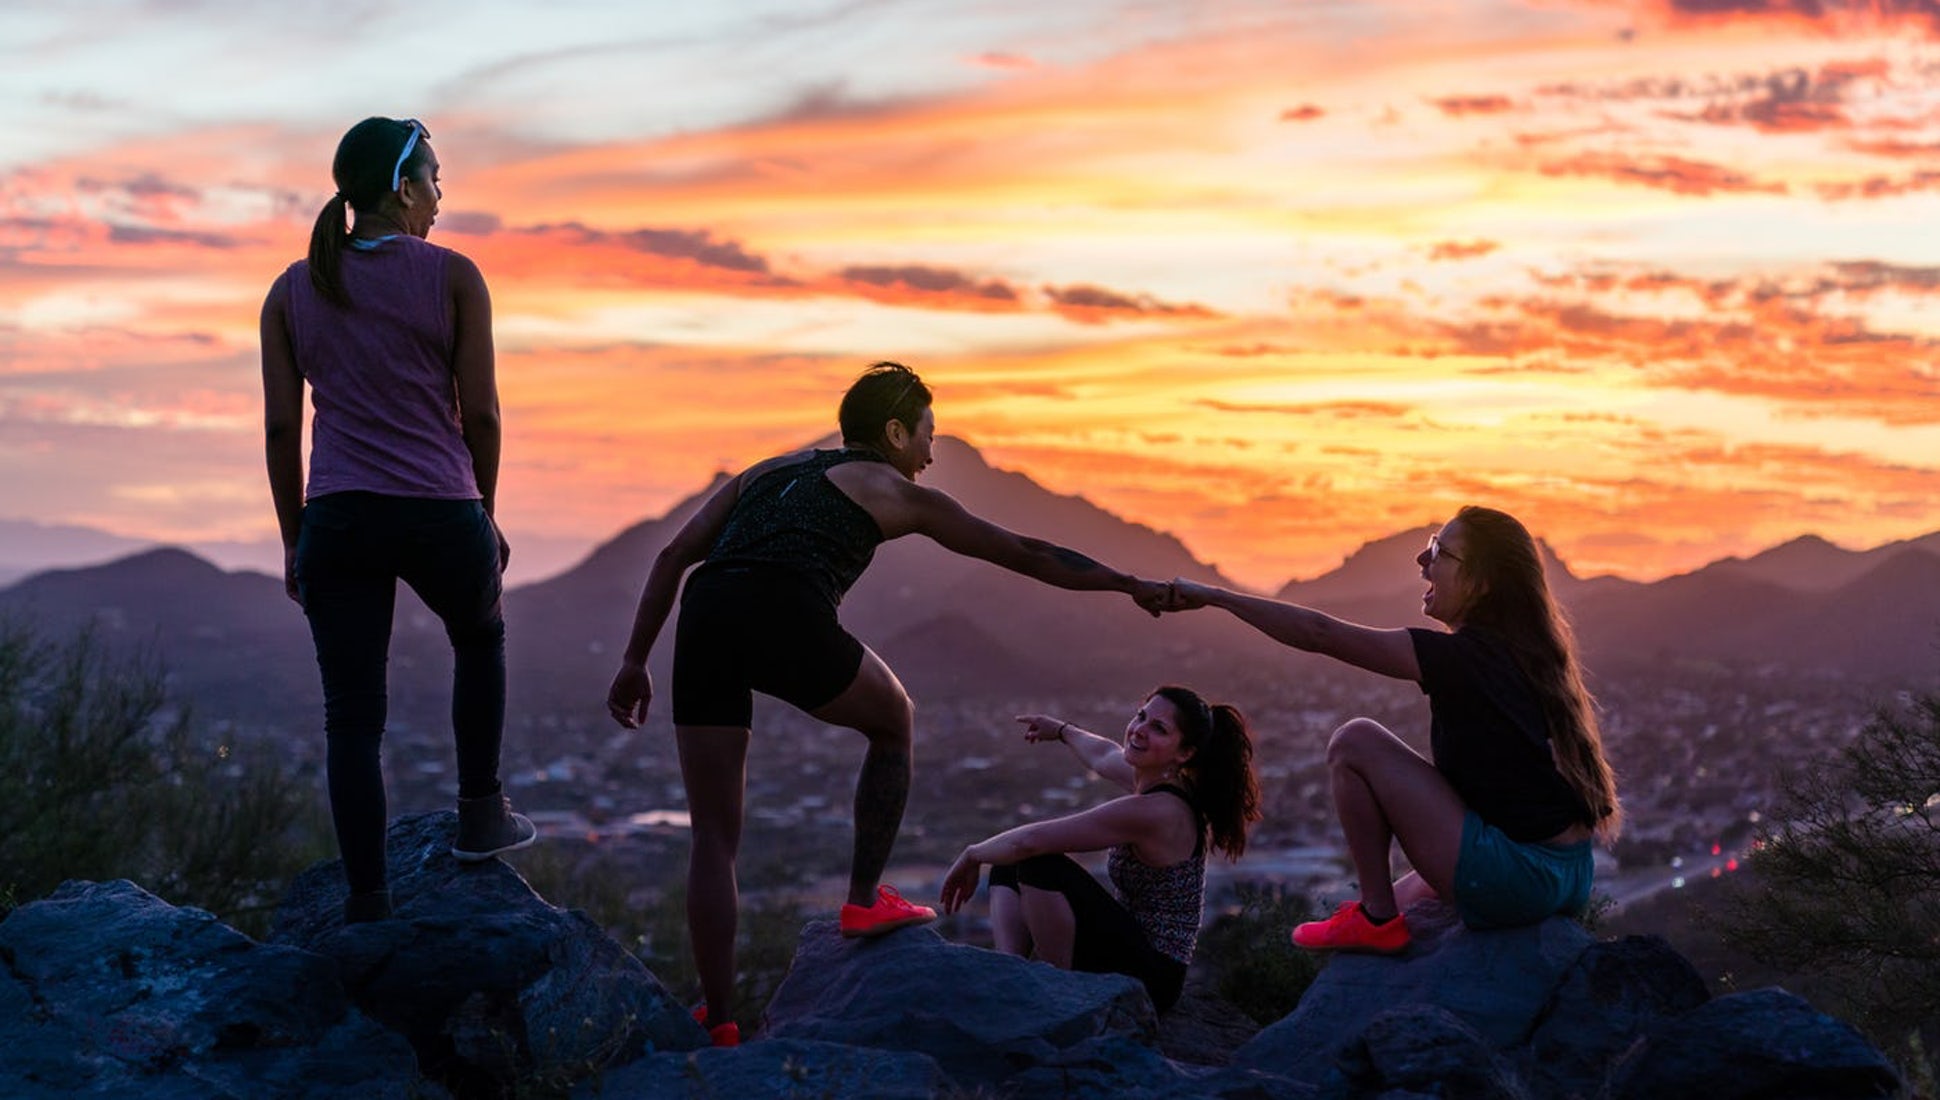 people gather on a mountain during the sunset